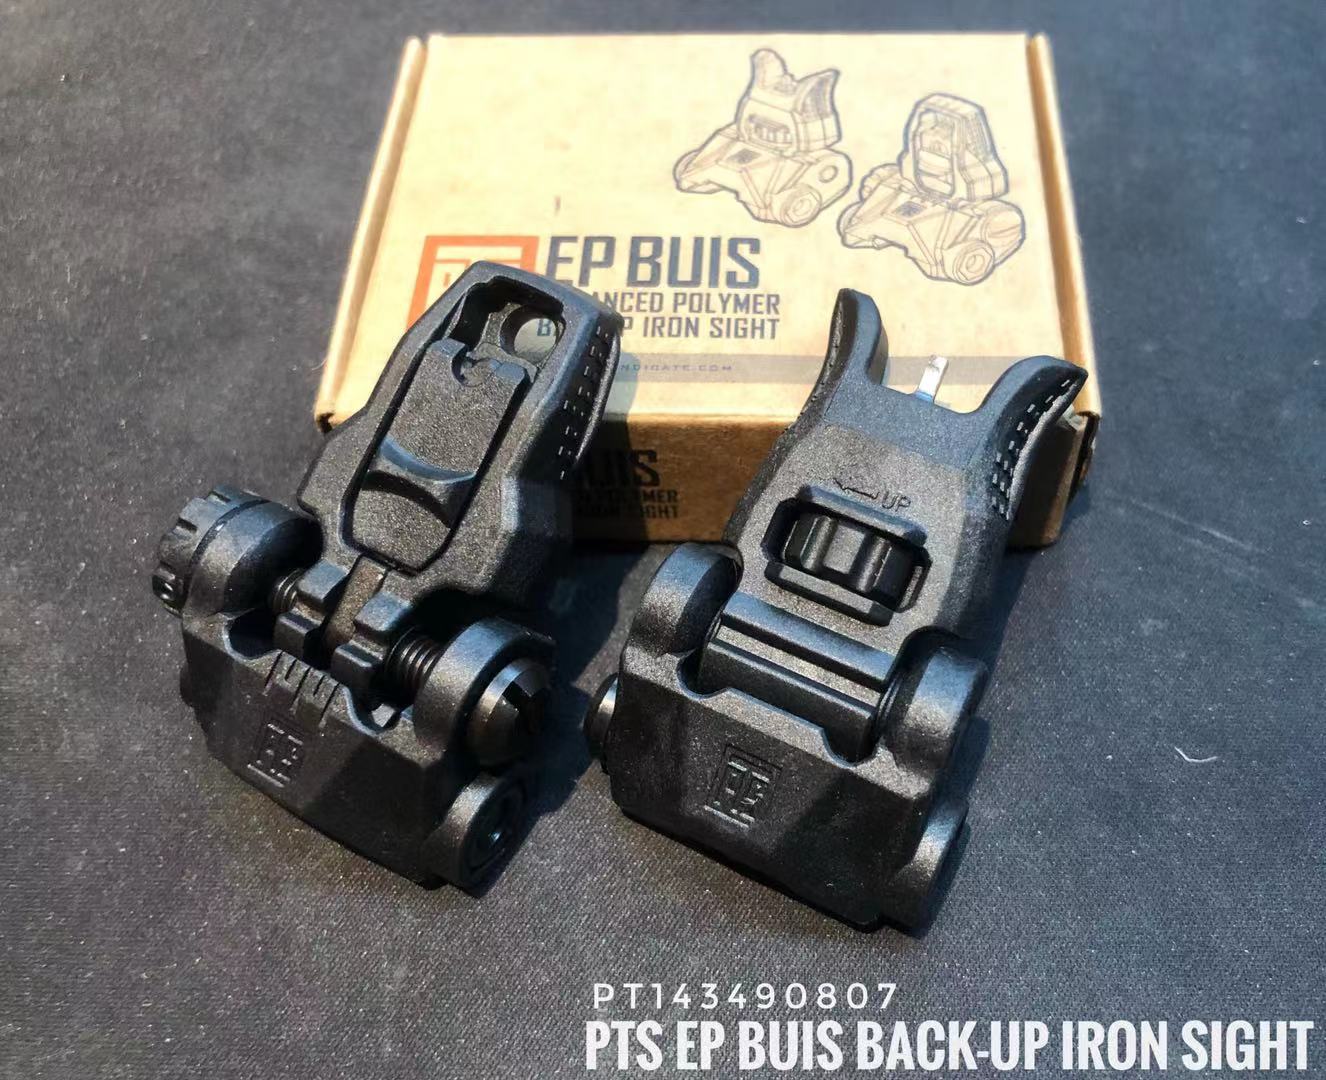 PTS】ENHANCED POLYMER BACK UP IRON SIGHT EP BUIS バックアップ ...